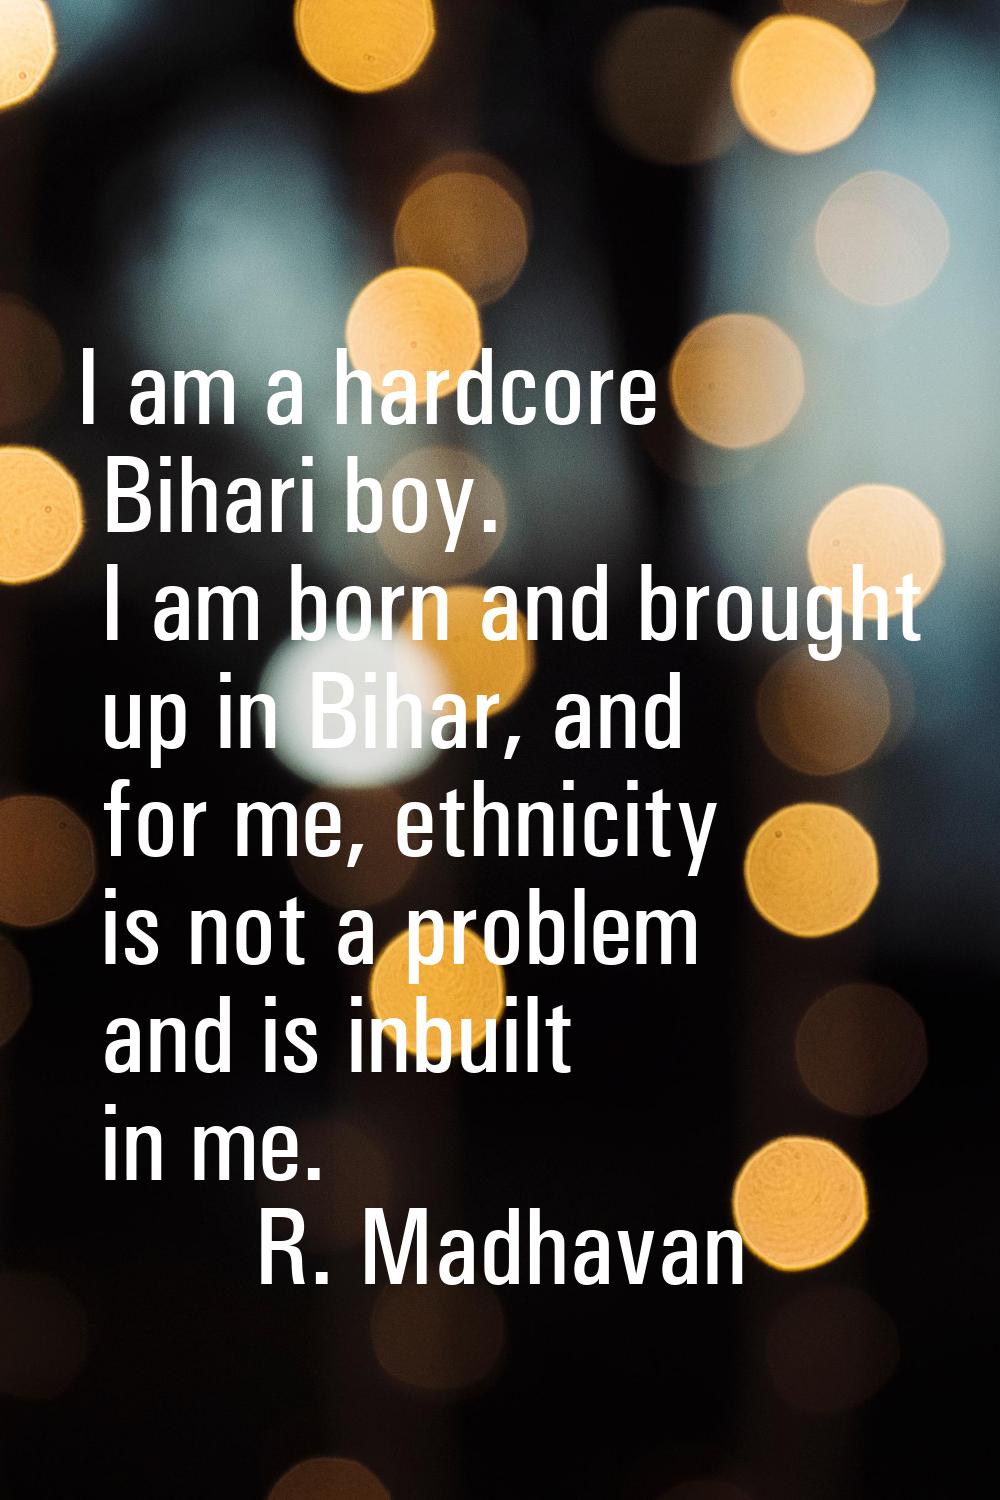 I am a hardcore Bihari boy. I am born and brought up in Bihar, and for me, ethnicity is not a probl